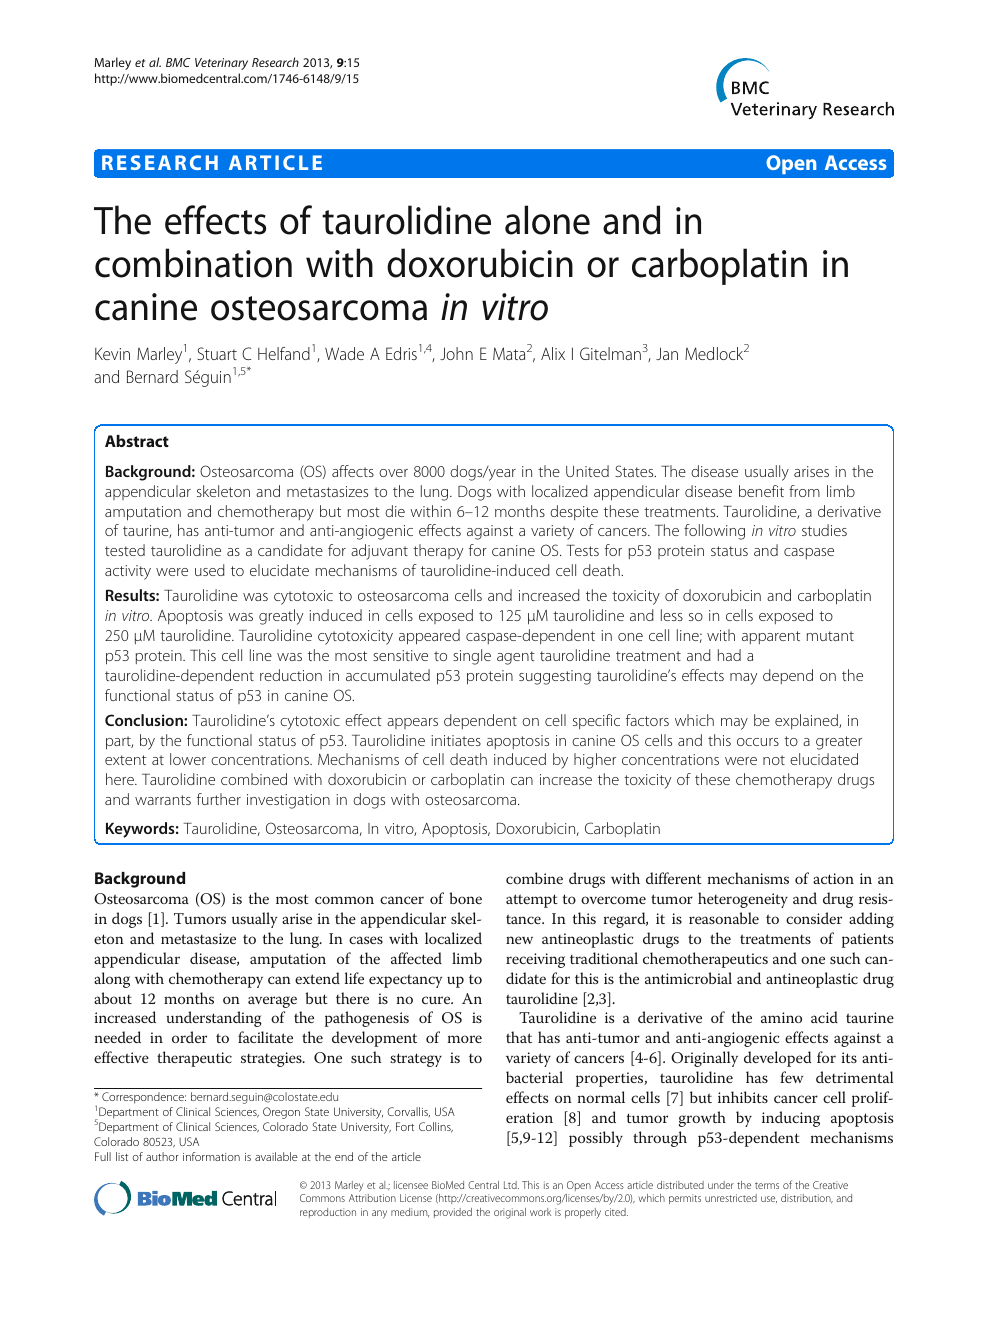 The Effects Of Taurolidine Alone And In Combination With Doxorubicin Or Carboplatin In Canine Osteosarcoma In Vitro Topic Of Research Paper In Veterinary Science Download Scholarly Article Pdf And Read For